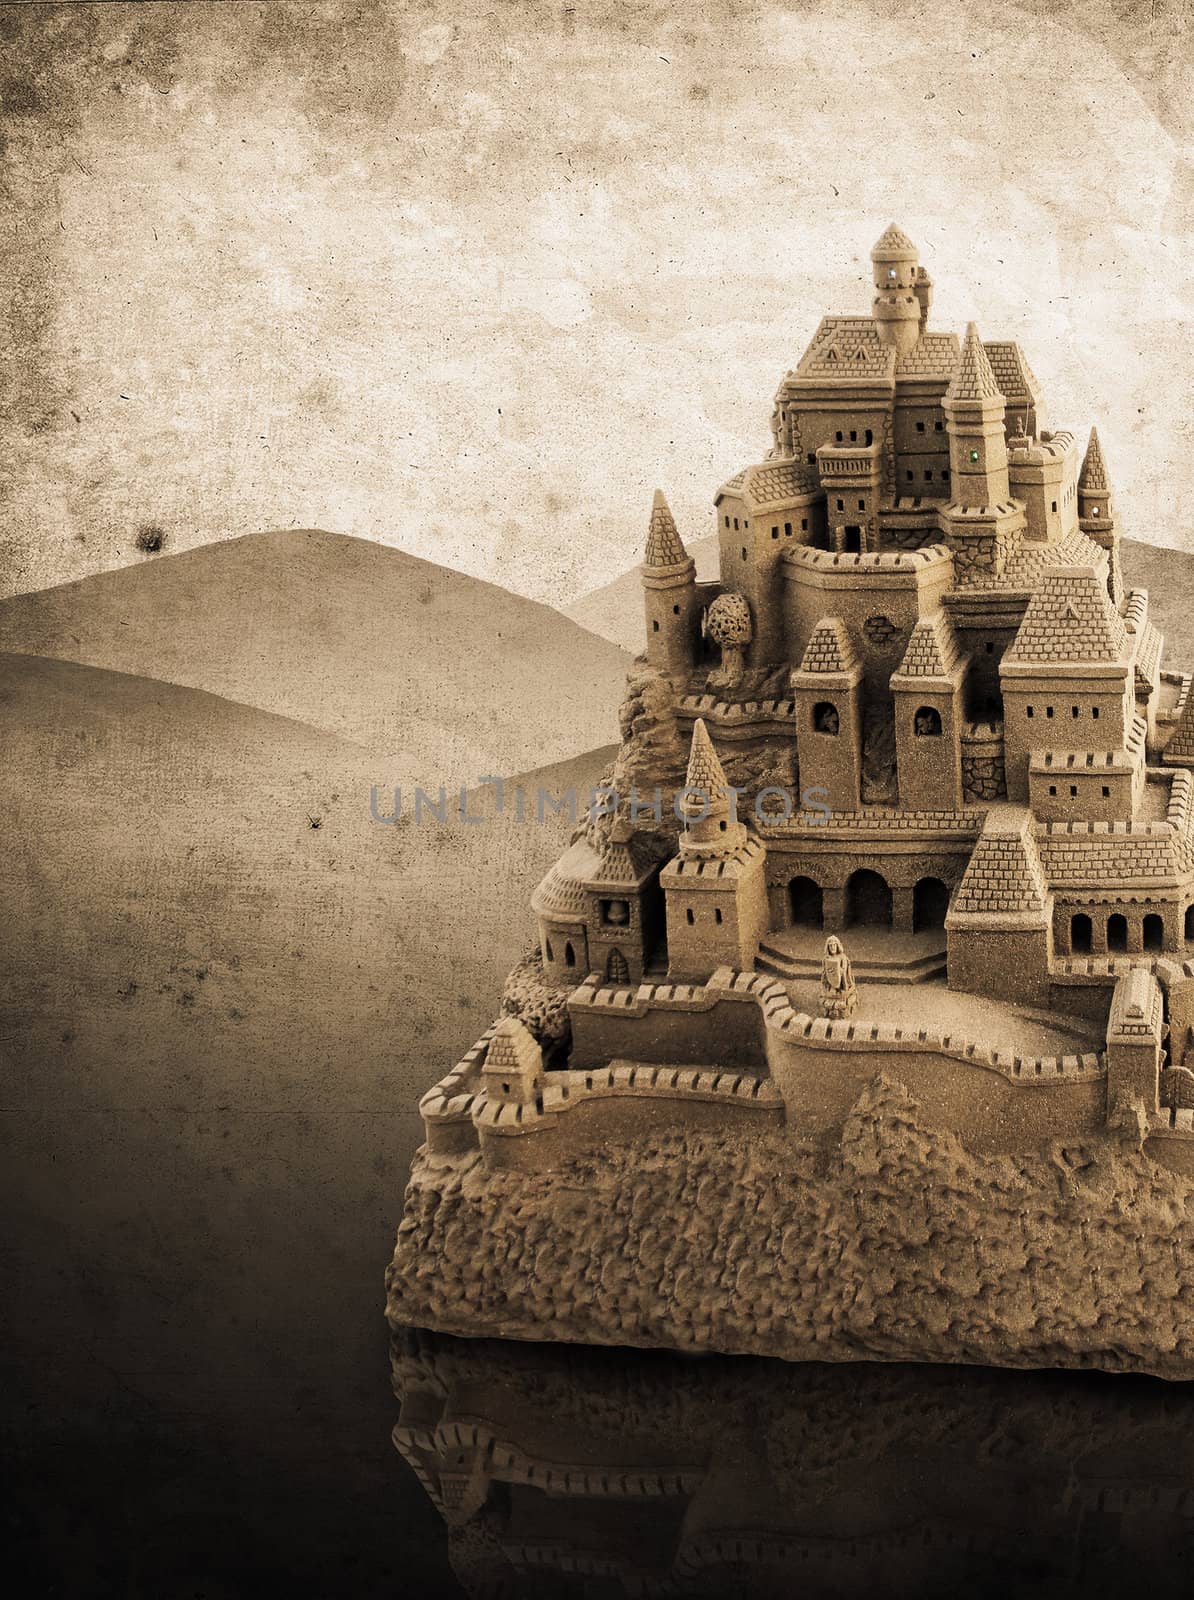 large sandcastle with many towers and crenels in retro look